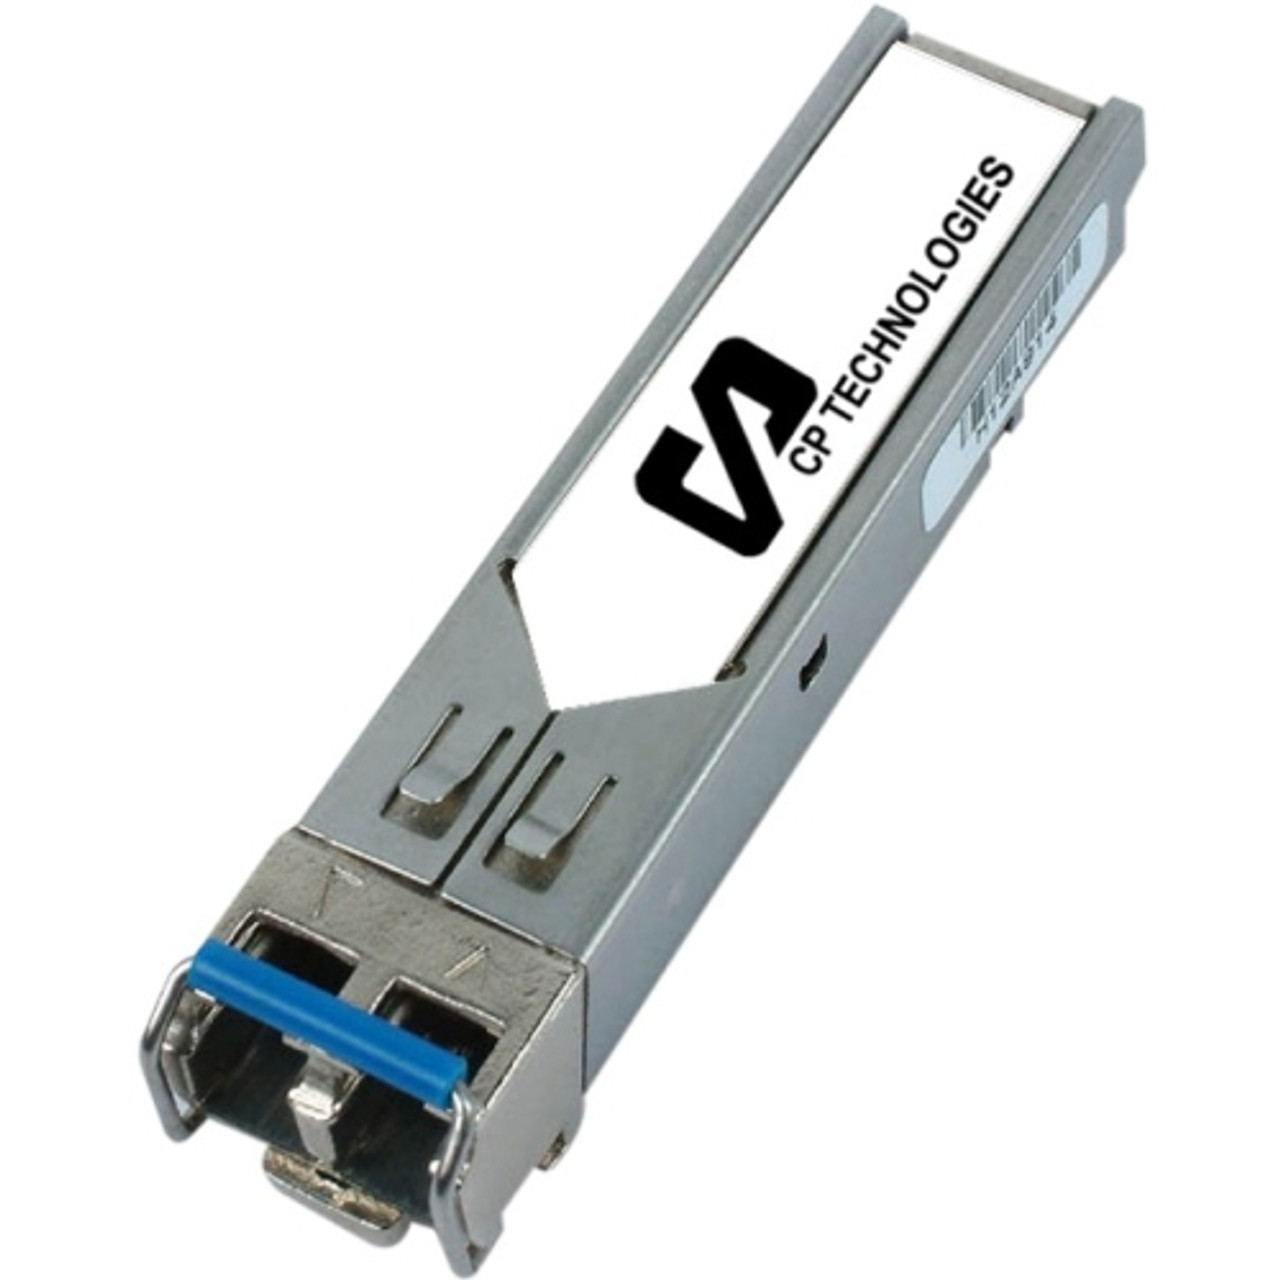 AXM761-CP CP TECH 10.3Gbps 10GBase-SR Multi-mode Fiber 300m 850nm Duplex LC Connector SFP+ Transceiver Module with DOM for NetGear Compatible